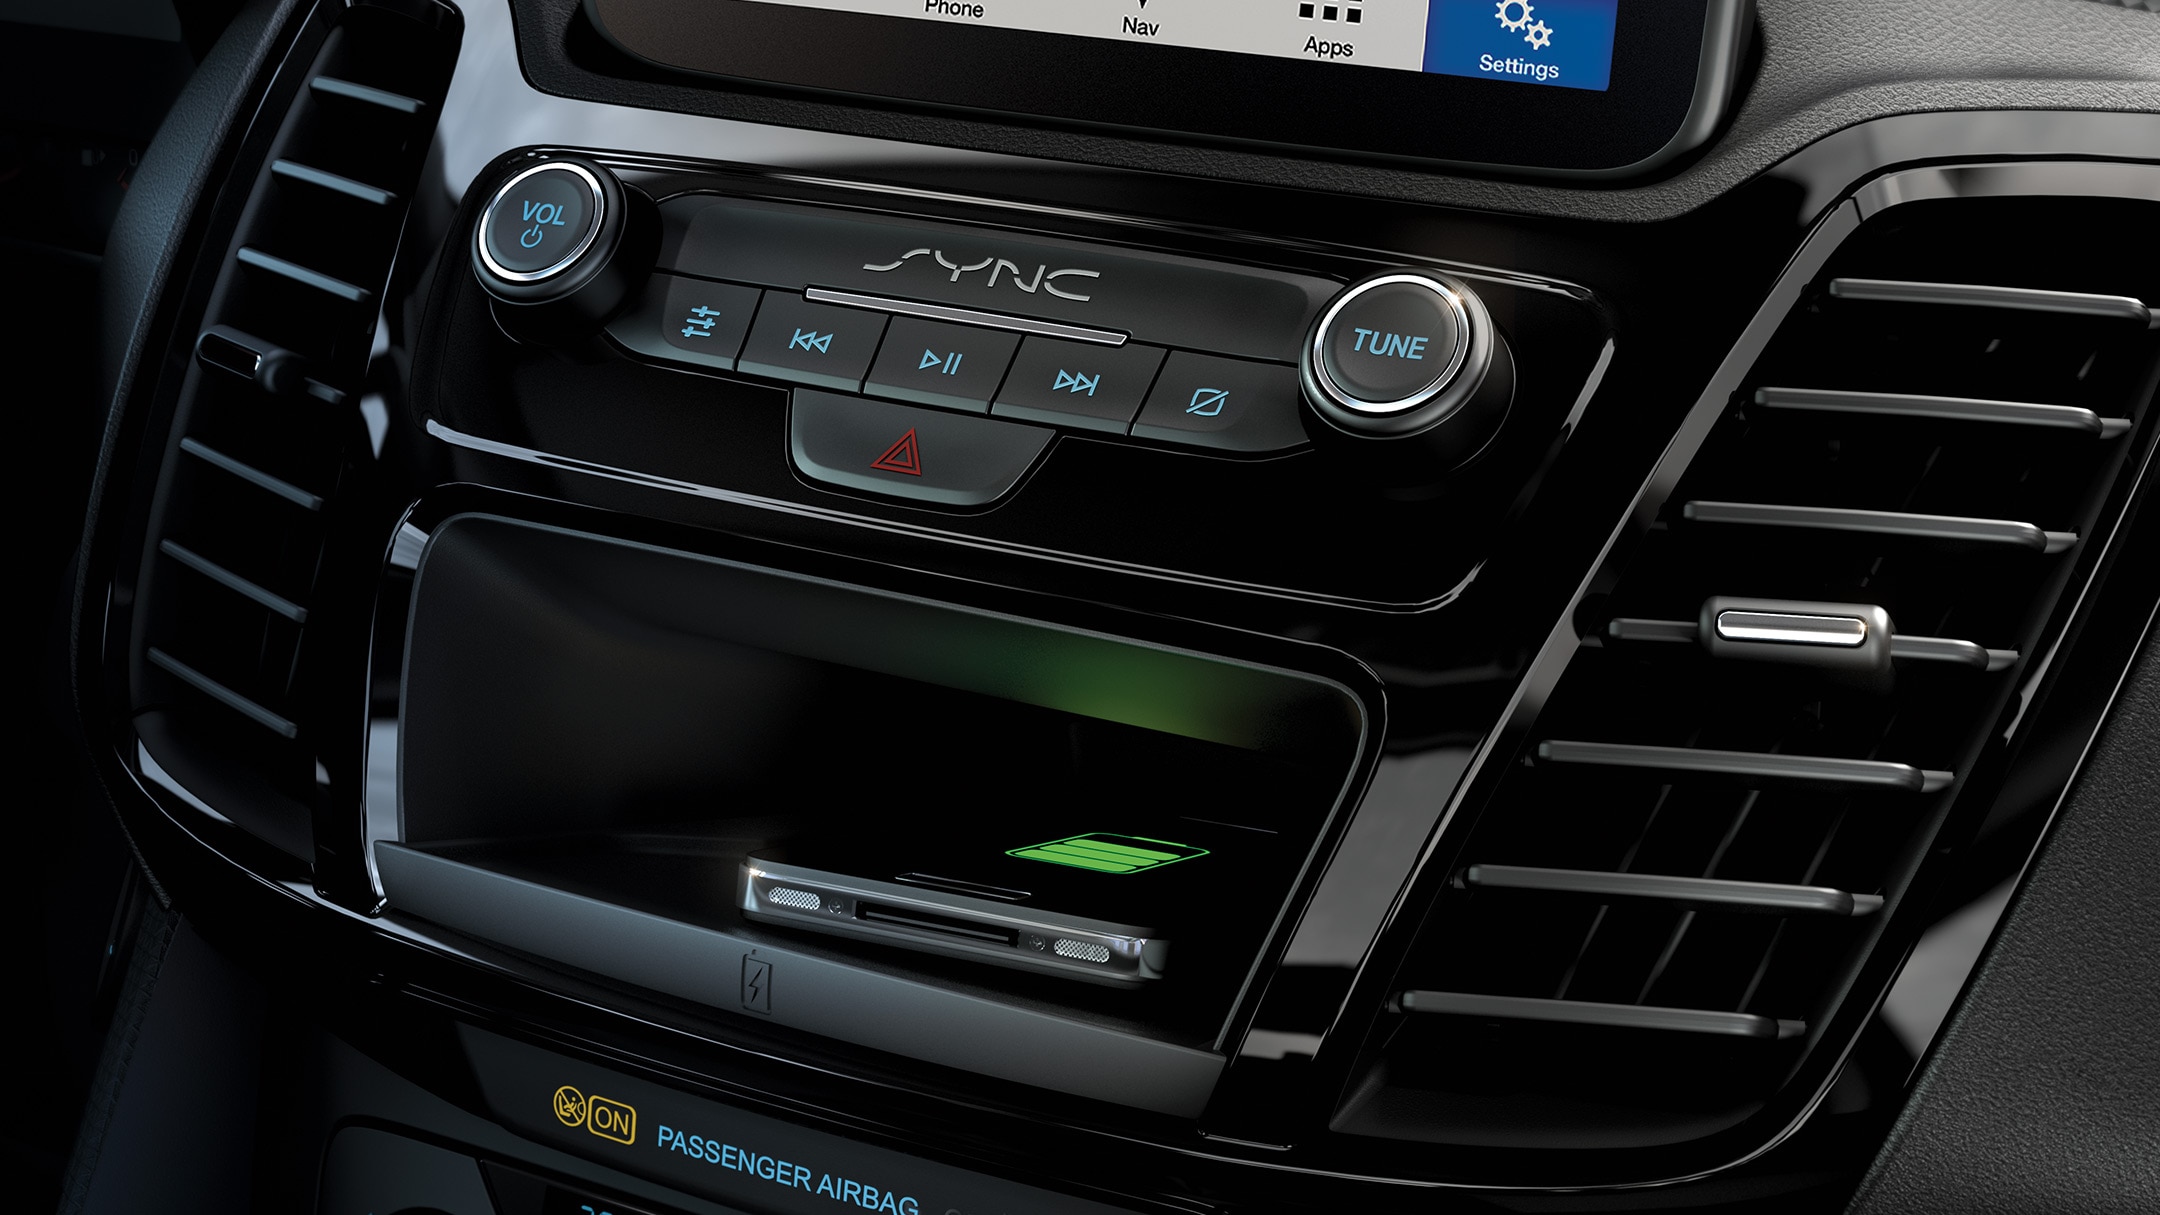 Ford Transit Connect device dock close up